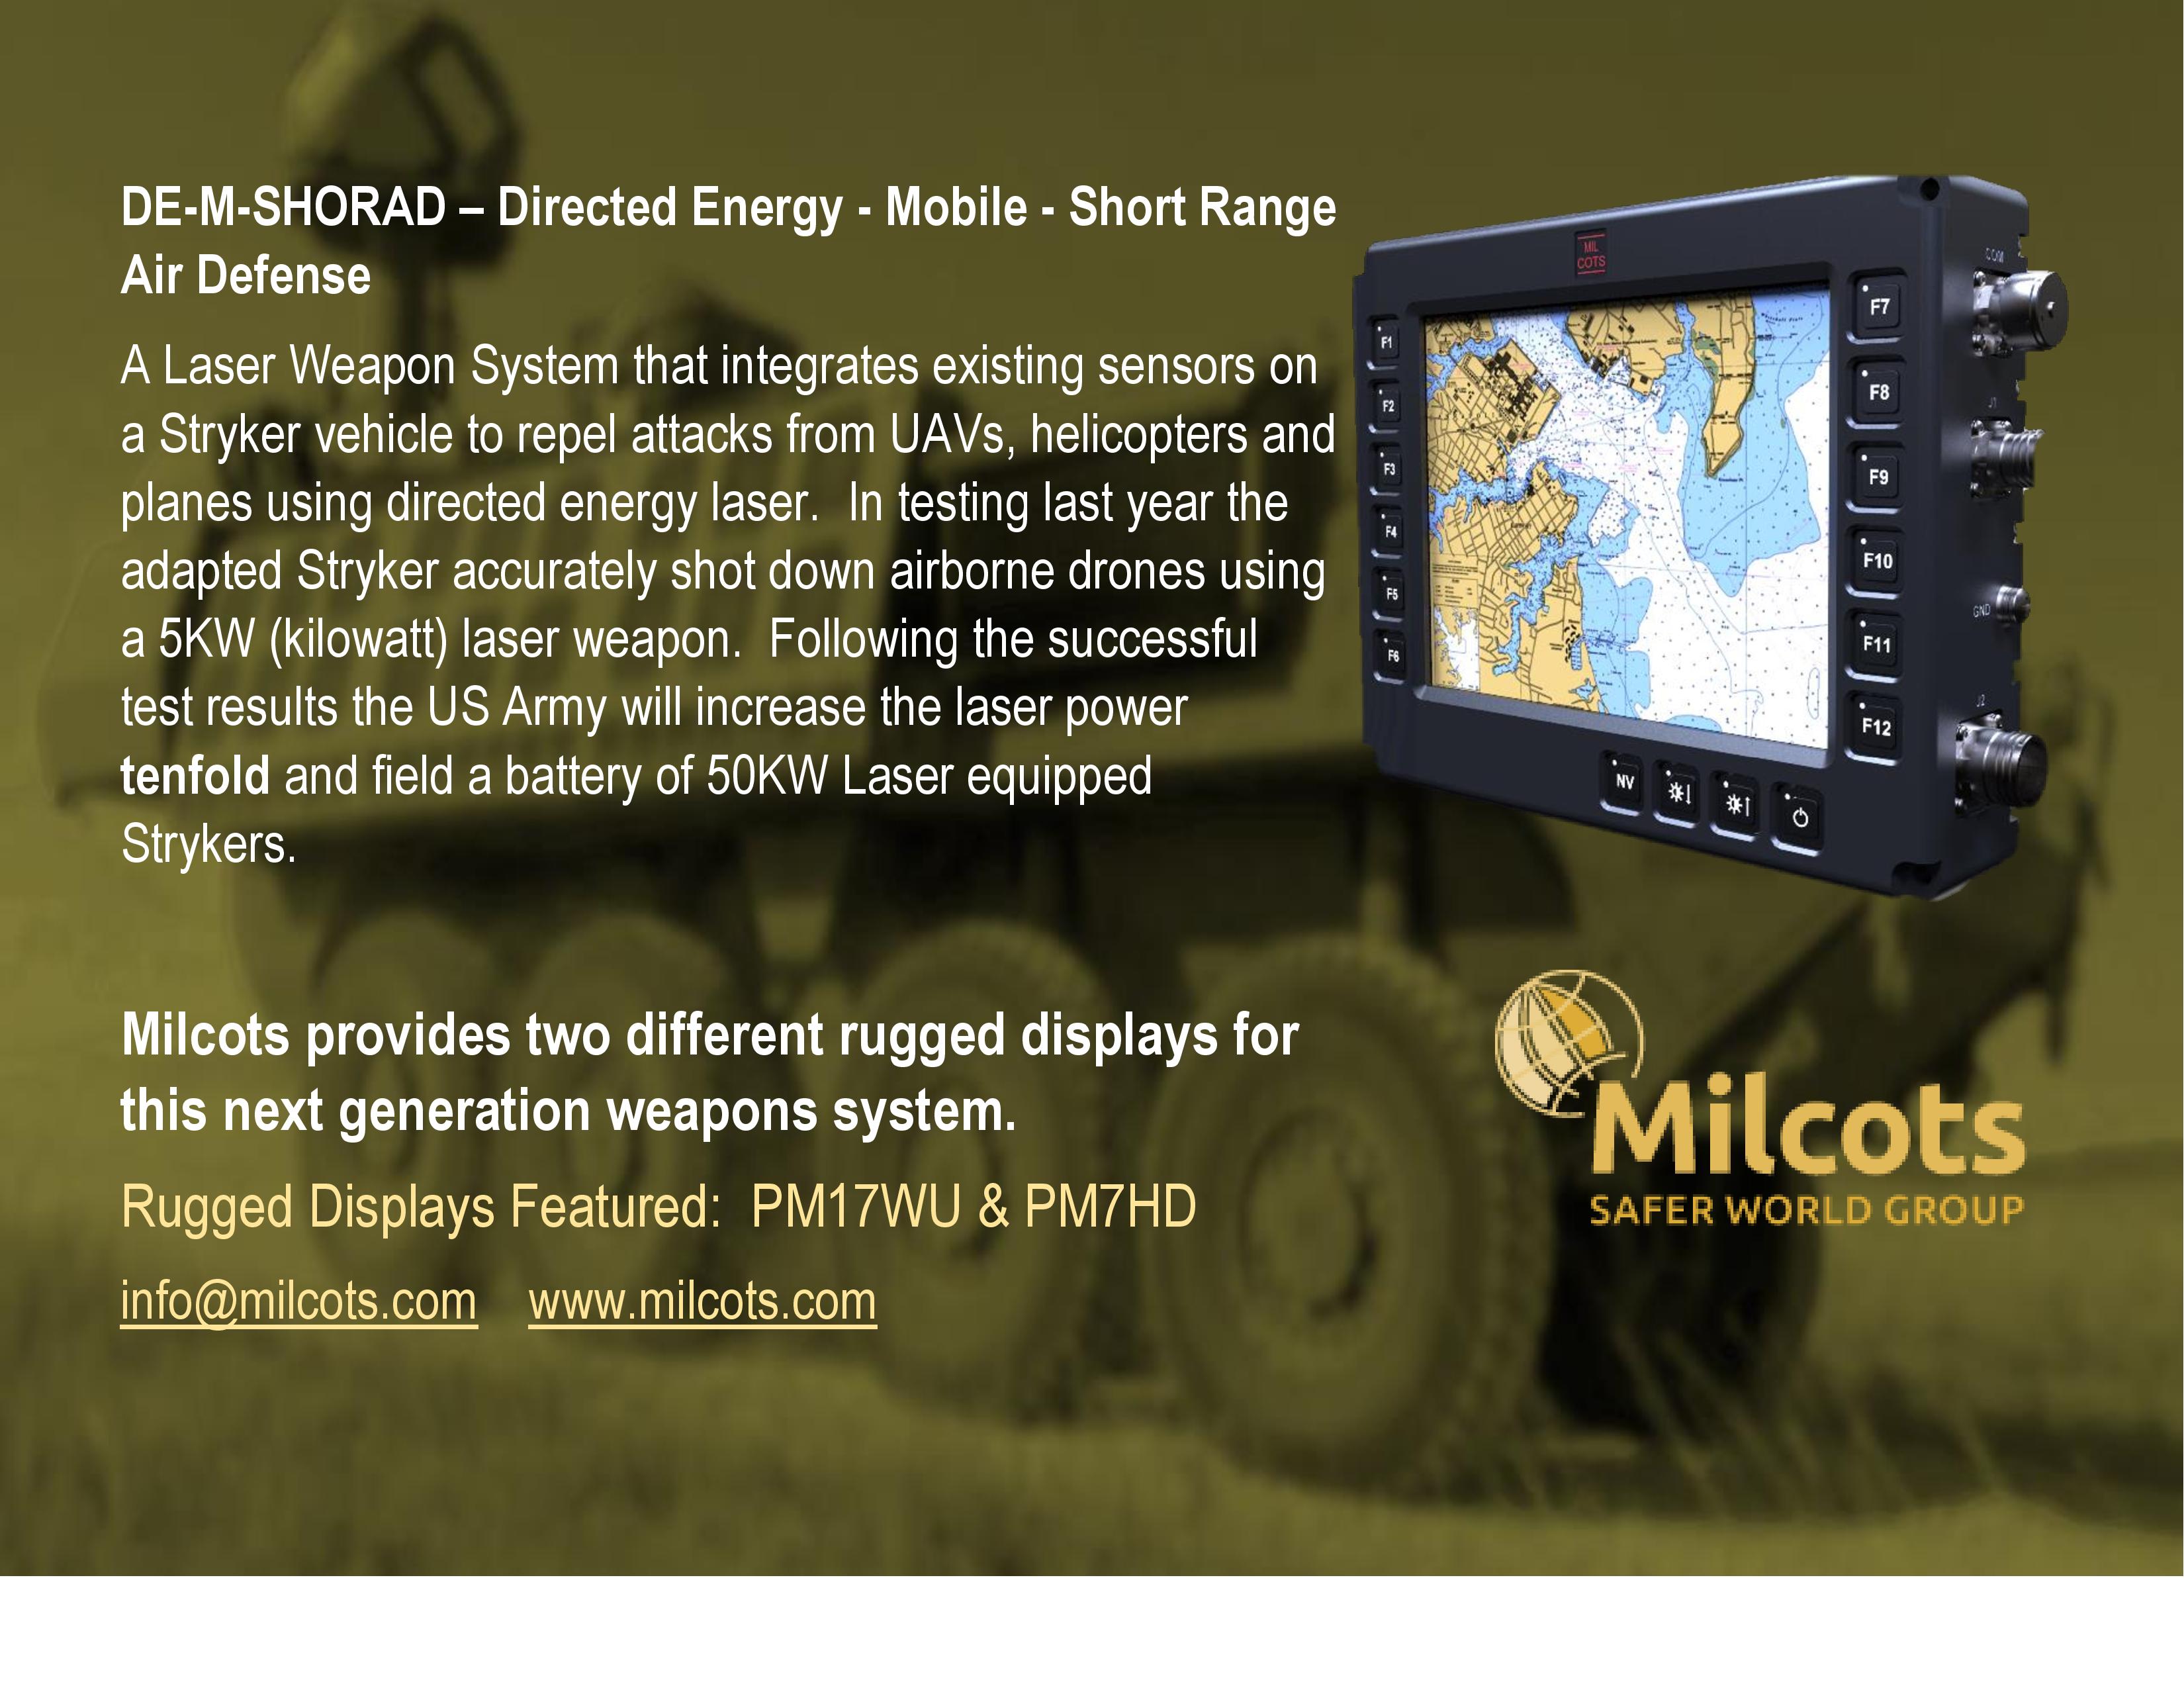 Milcots Rugged Displays on Directed Energy Weapons Program